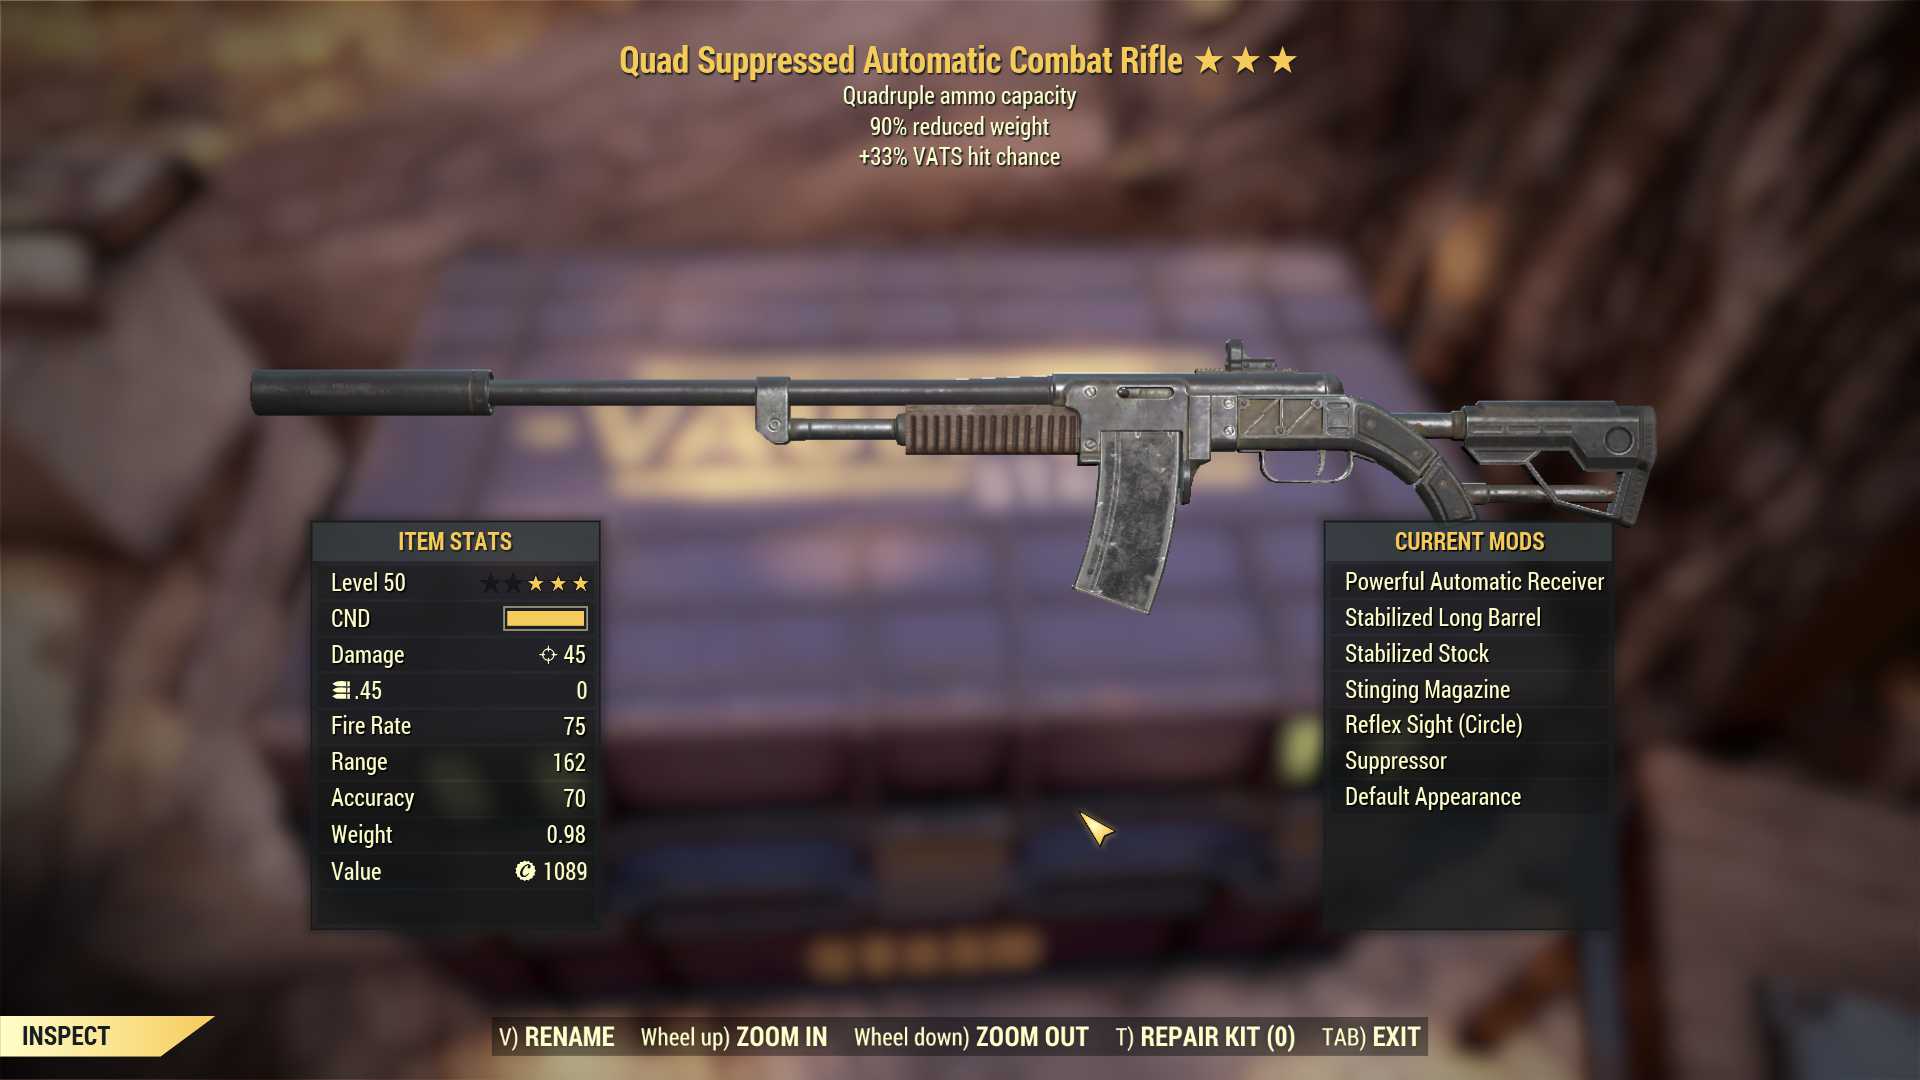 Quad Combat Rifle (+50% VATS hit chance, 90% reduced weight)